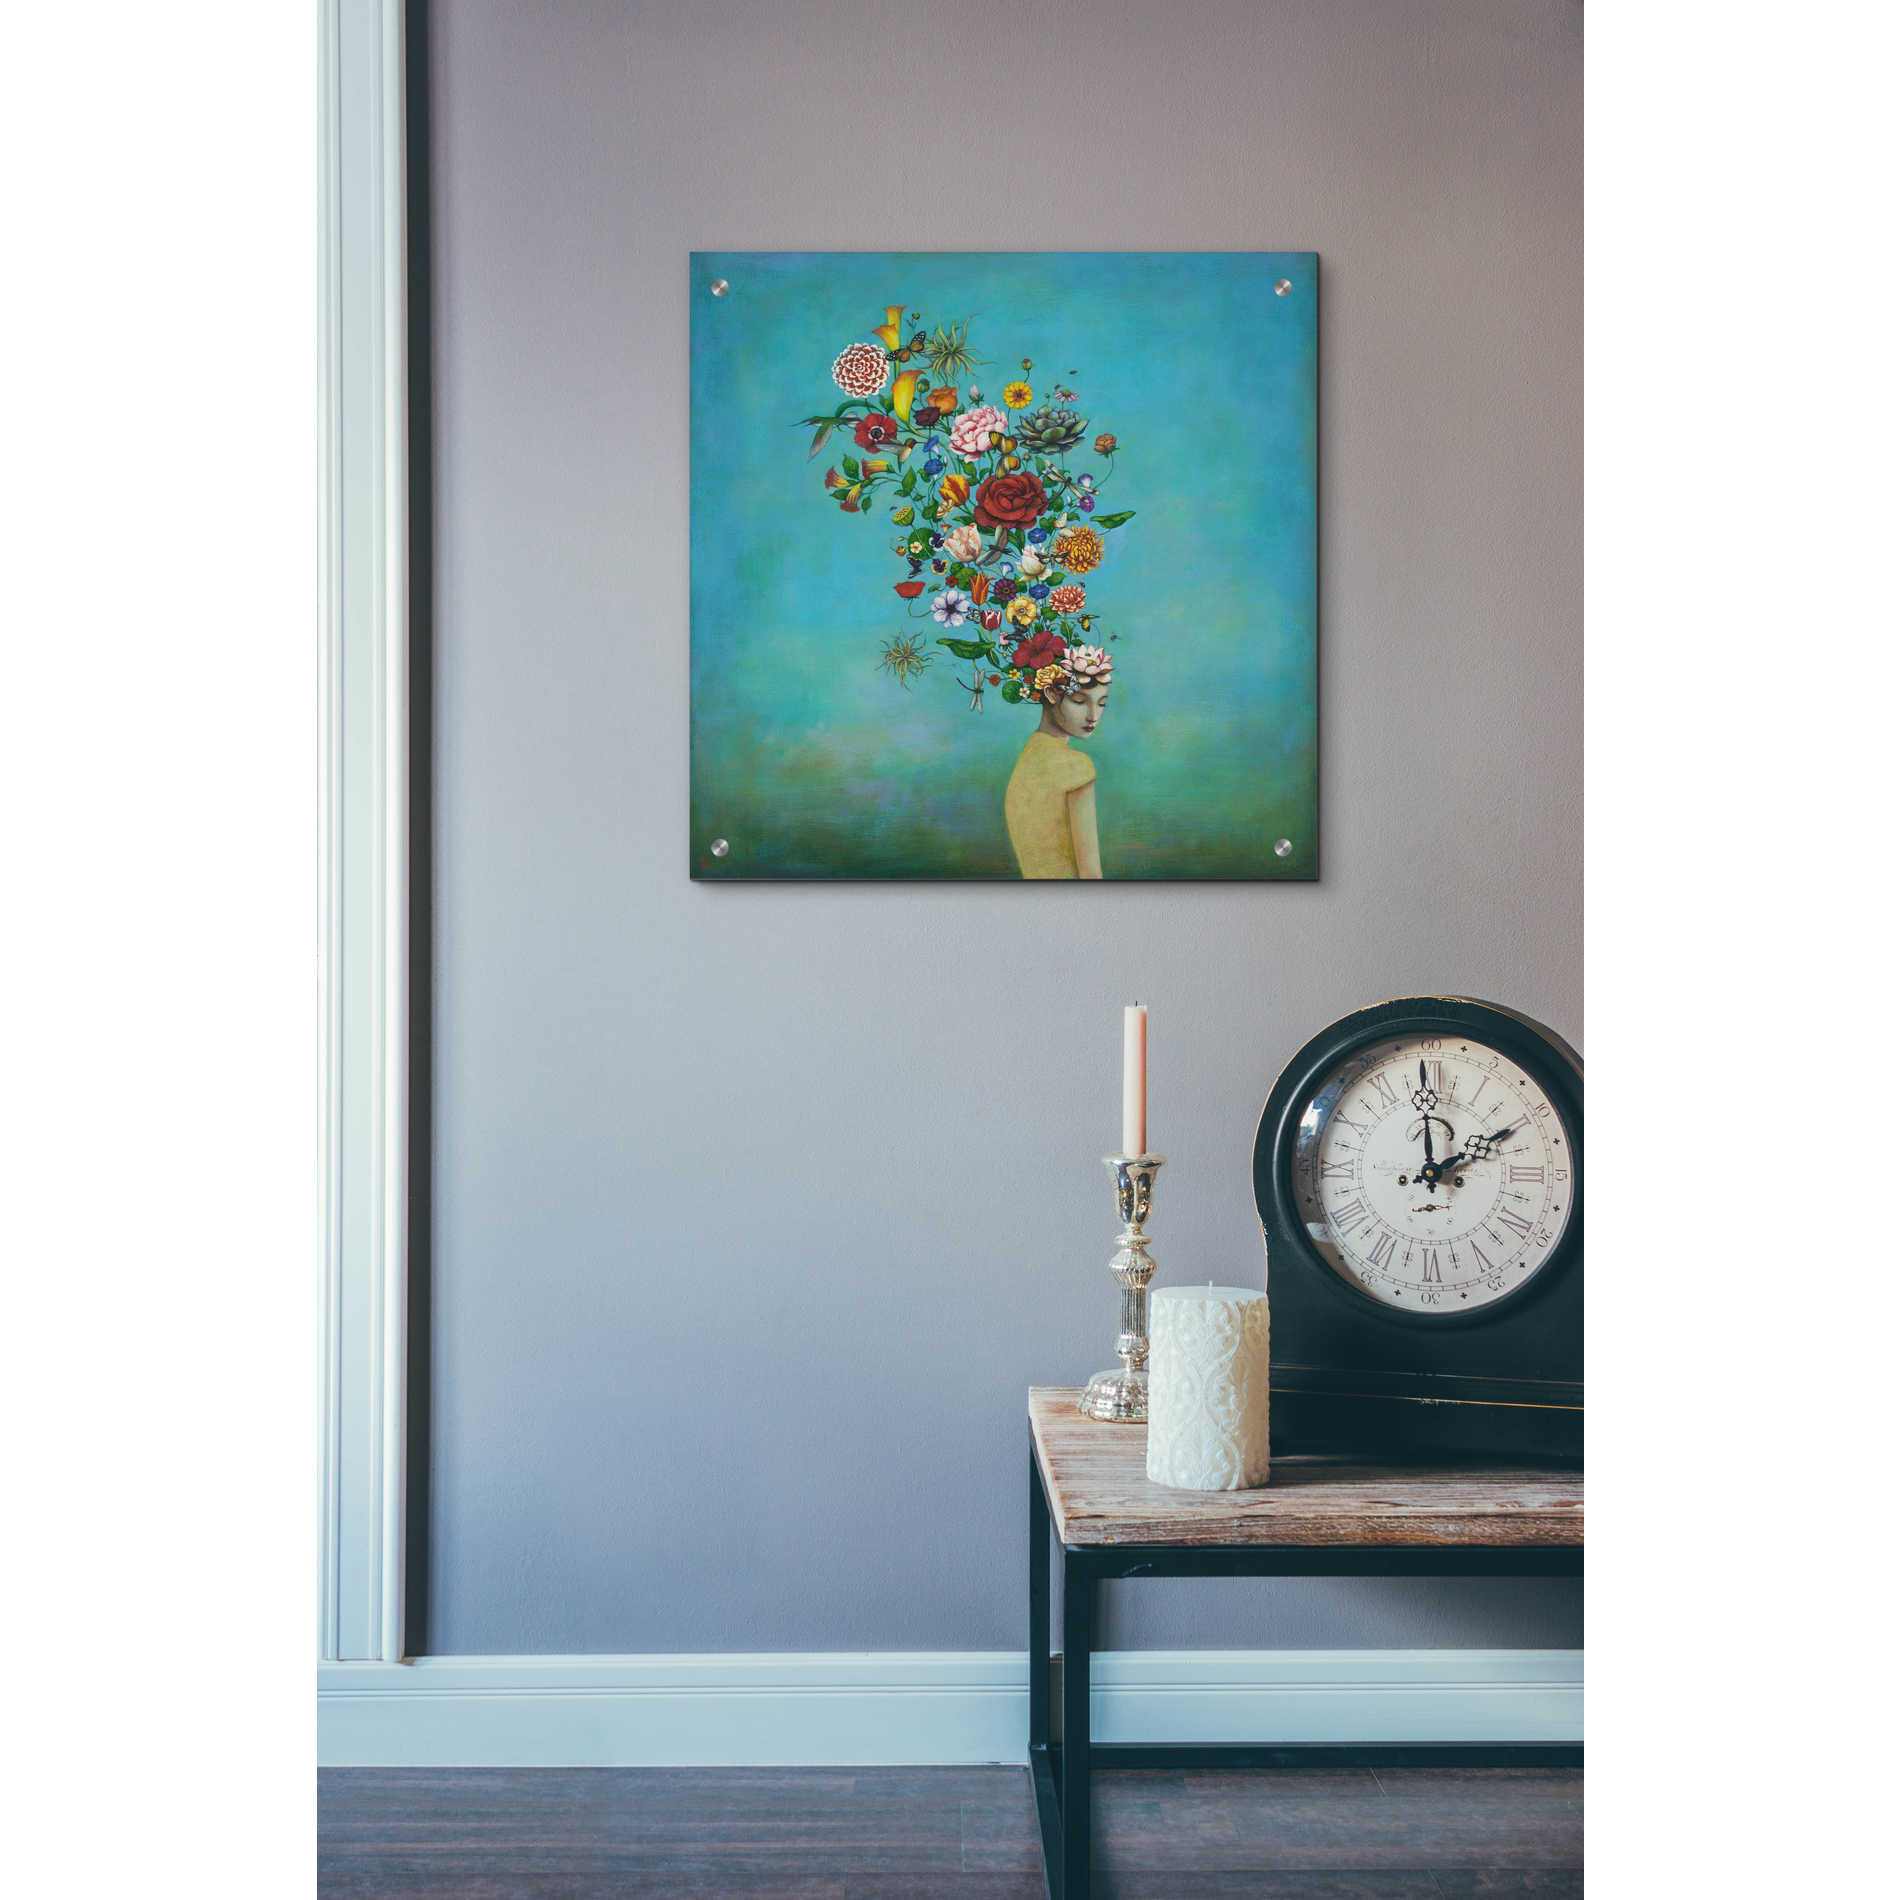 Epic Art 'A Mindful Garden' by Duy Huynh, Acrylic Glass Wall Art,24x24